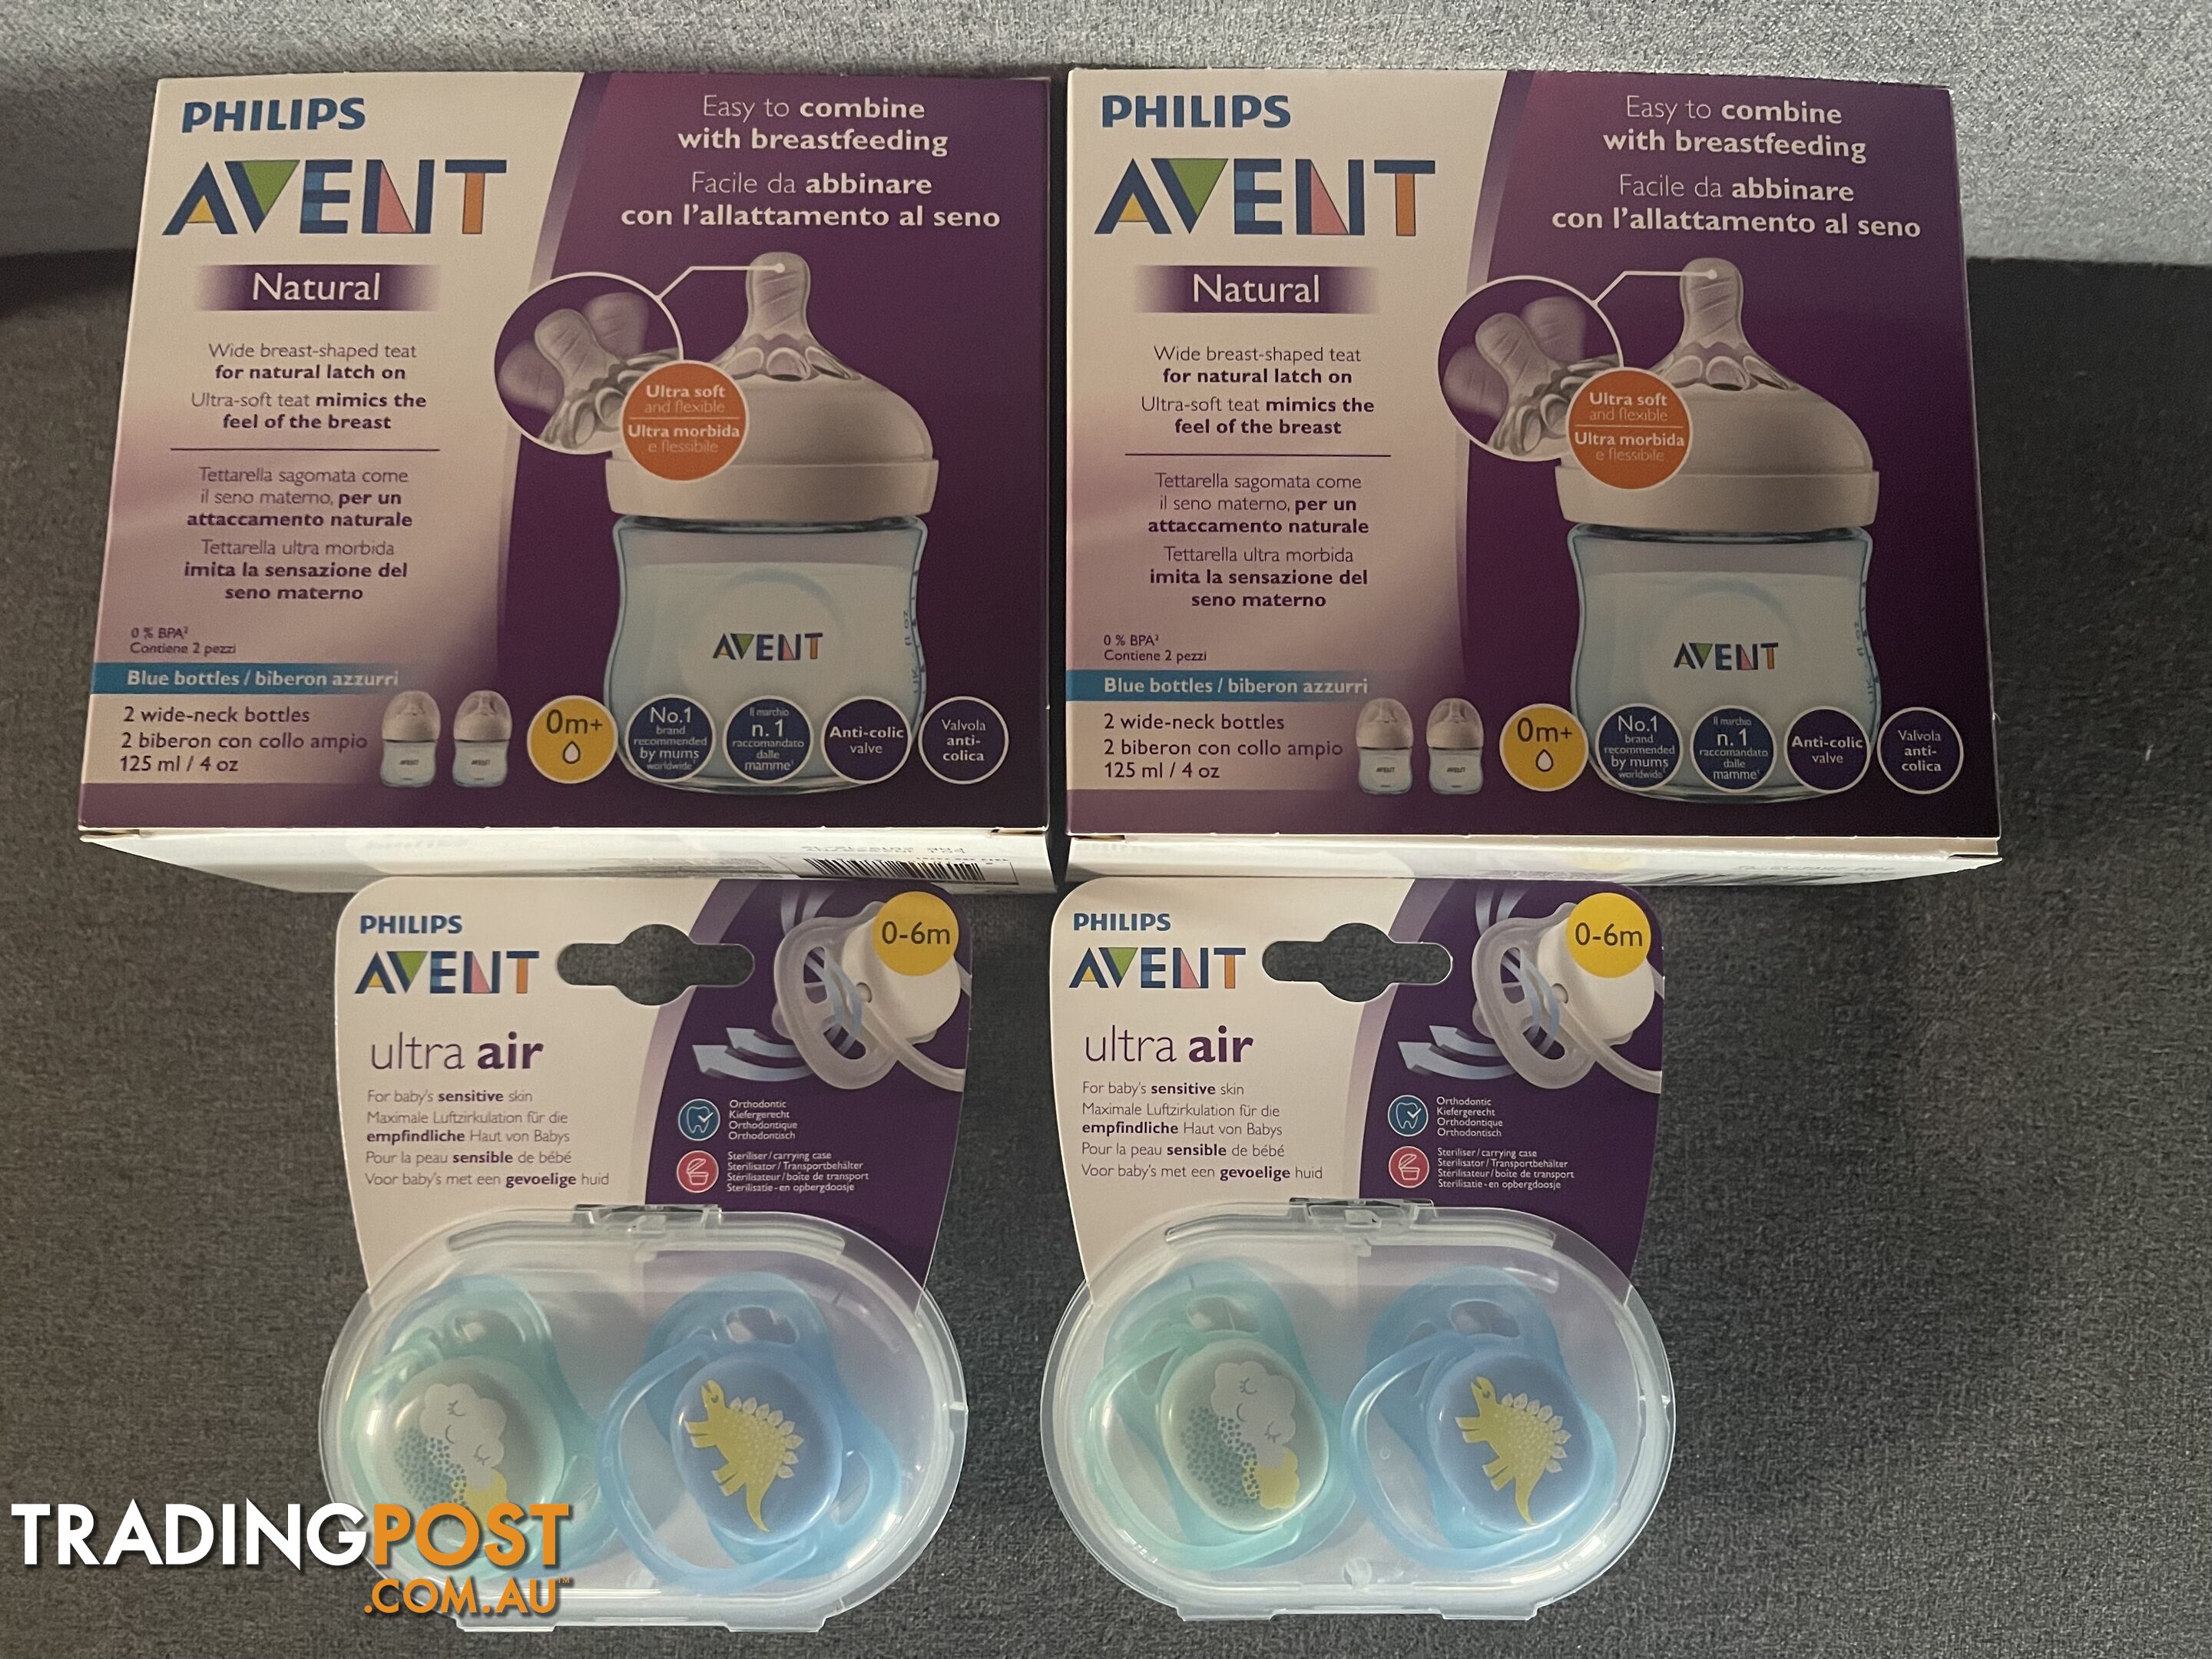 Avent Bottle and soothers pack